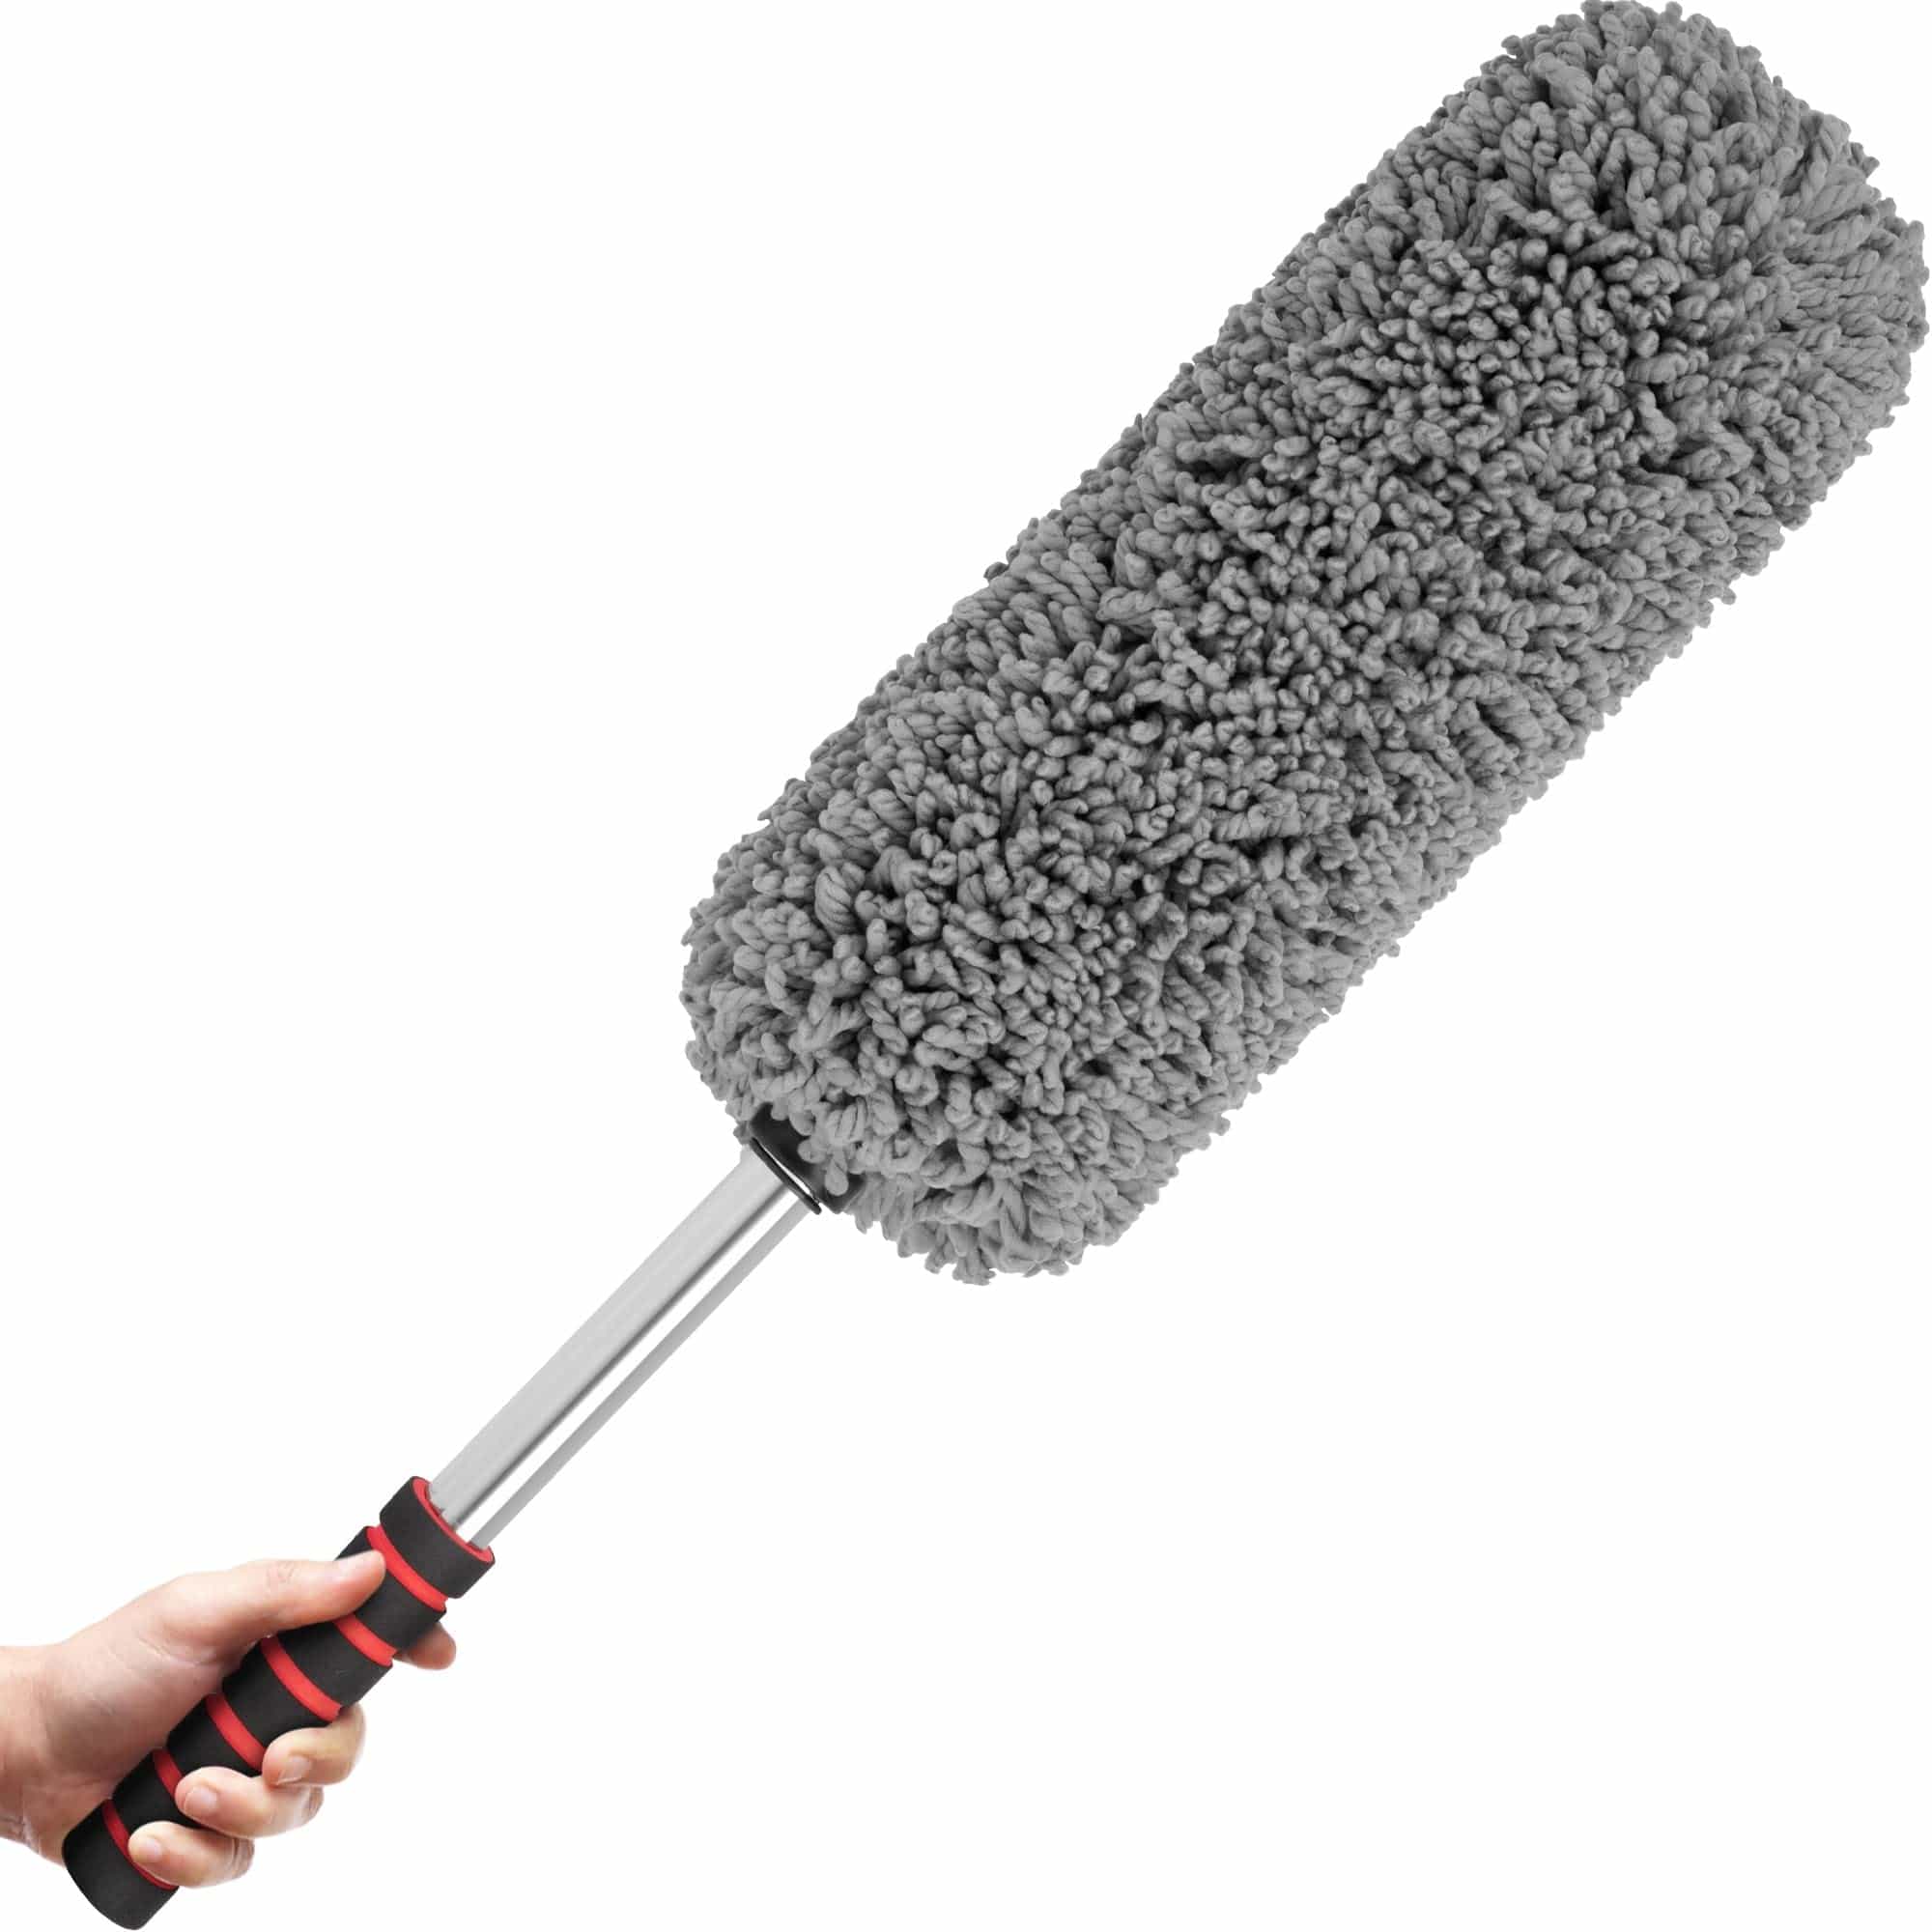  Car Detail Duster - 100% Lambswool | 10-Inch Long